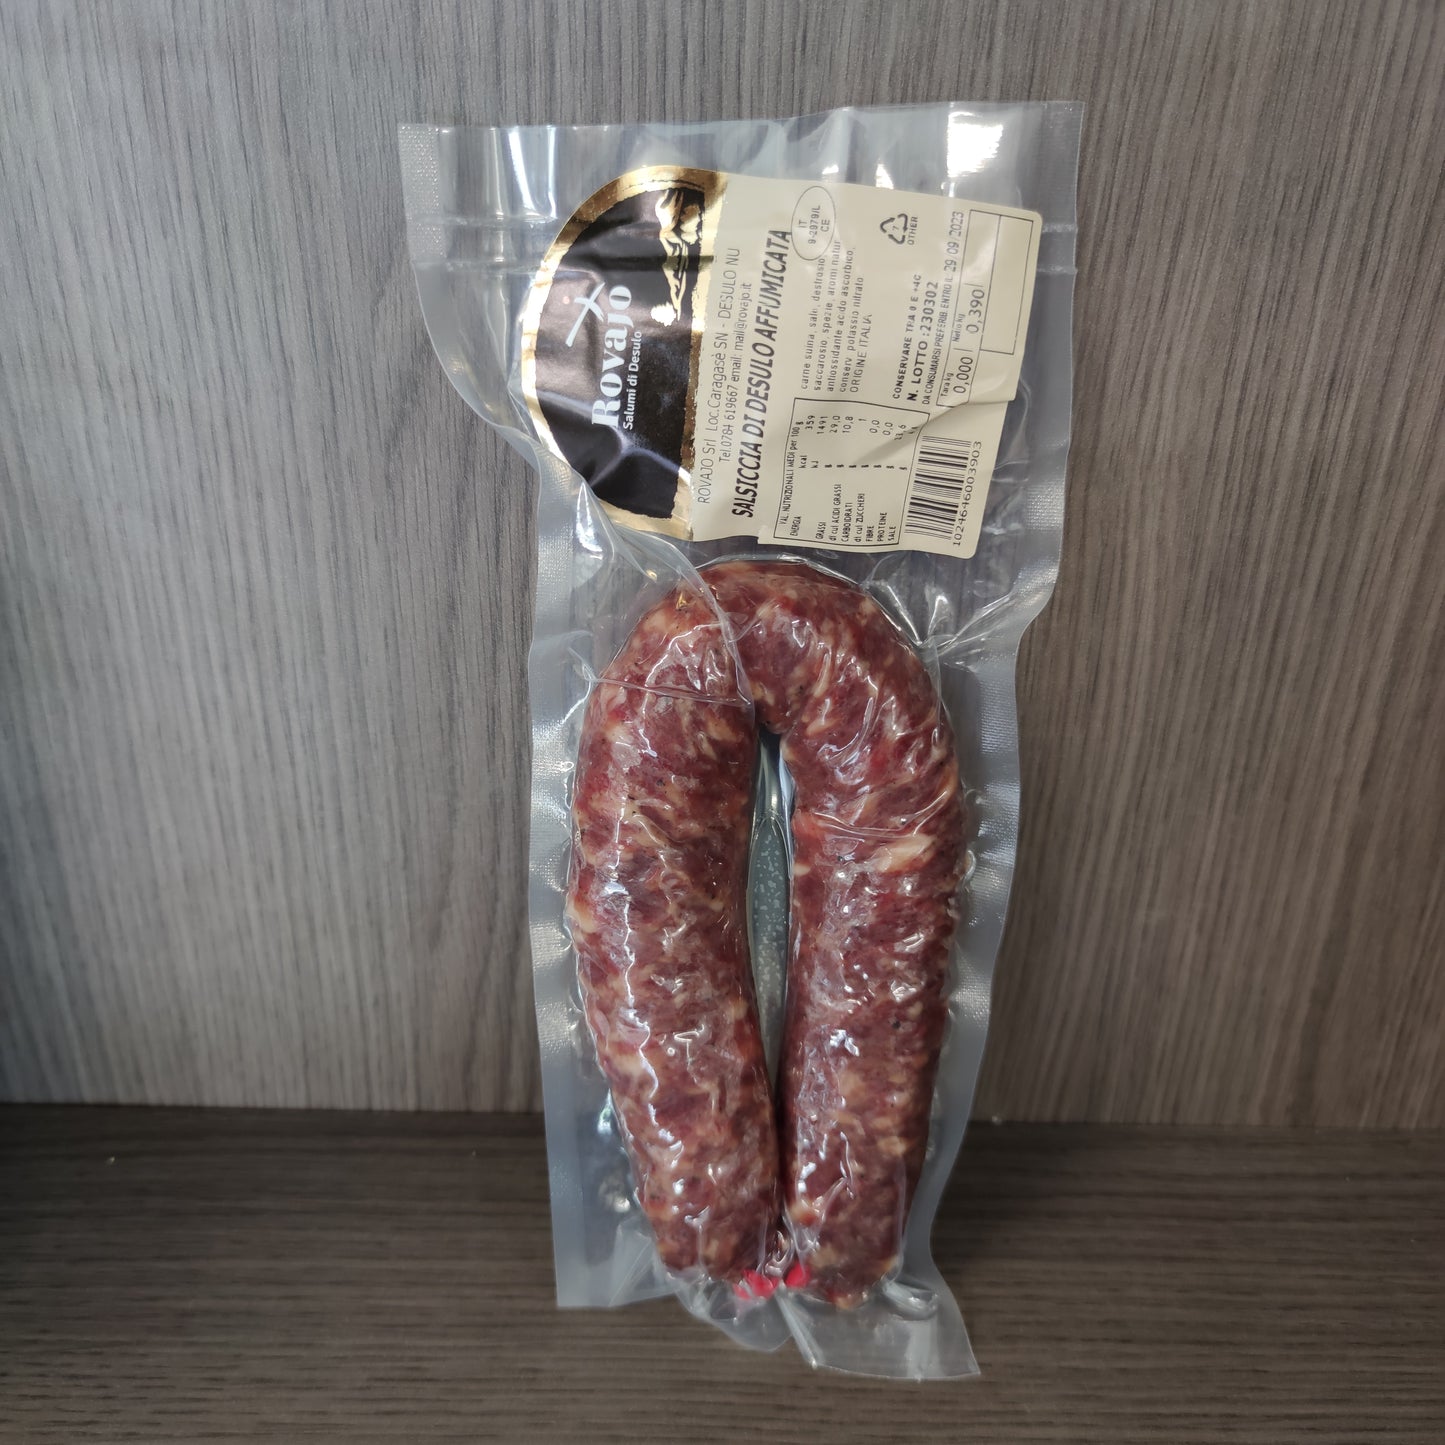 Desulo sausage (NU) approximately 400 grams, classic or smoked